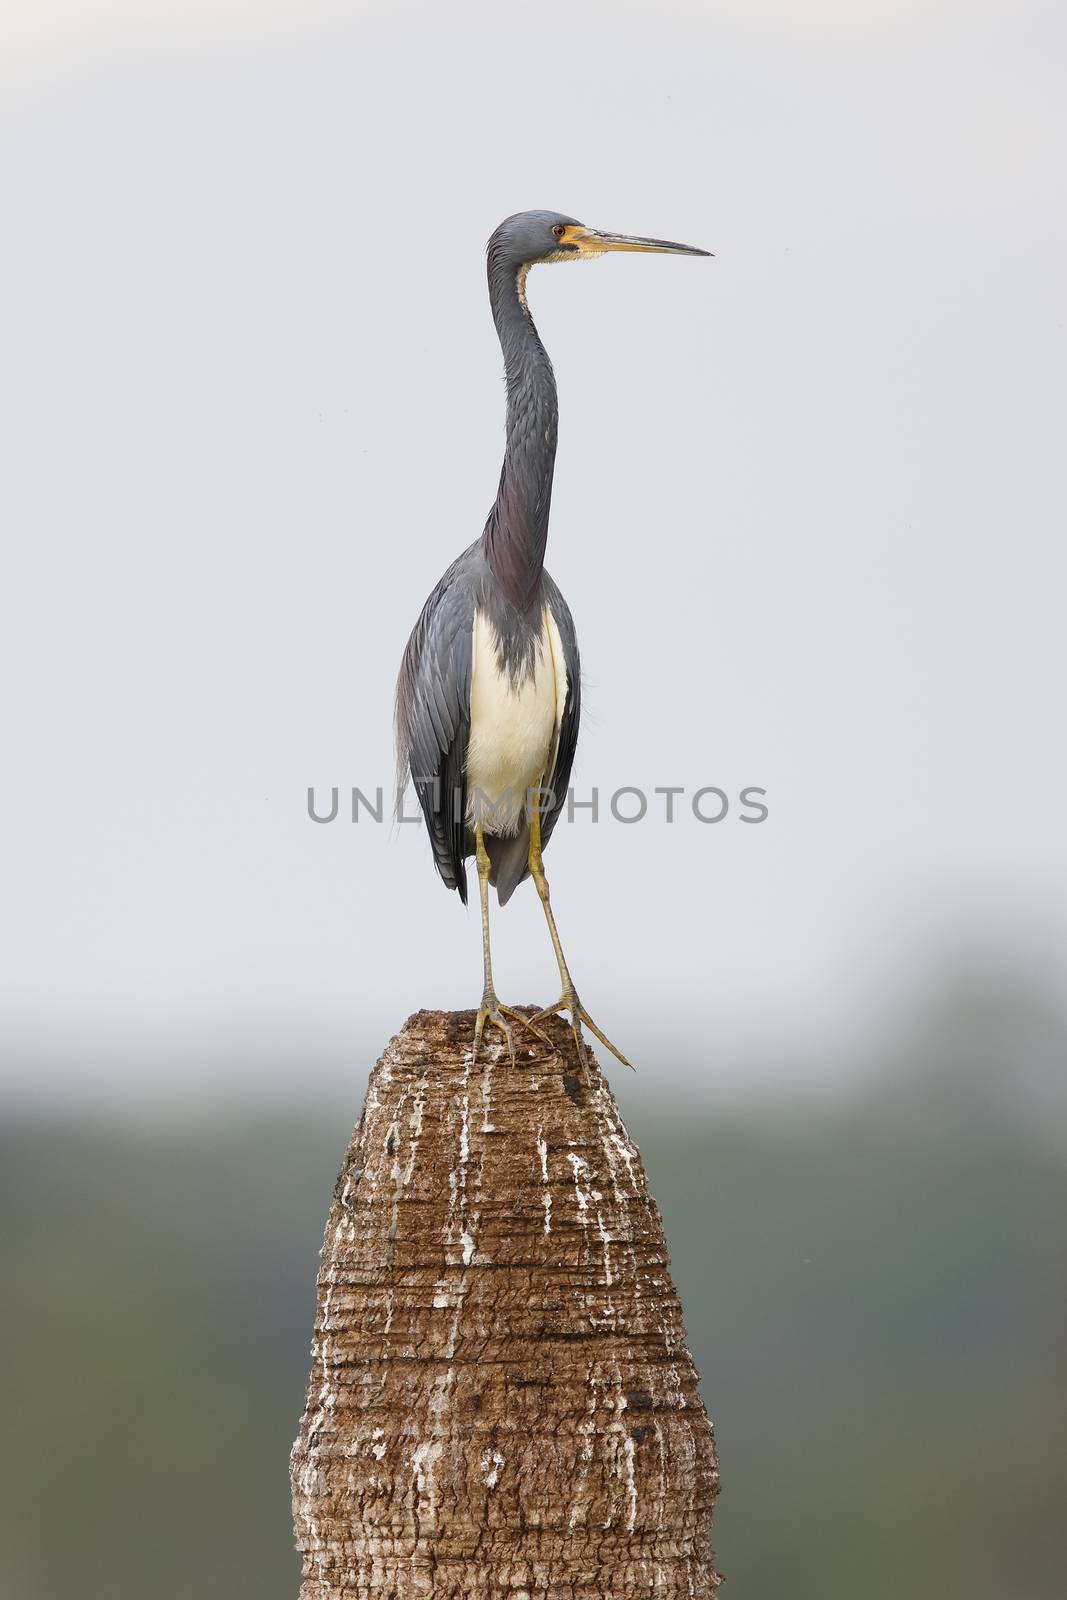 Tricolored Heron perched on a palm tree stump - Florida by gonepaddling